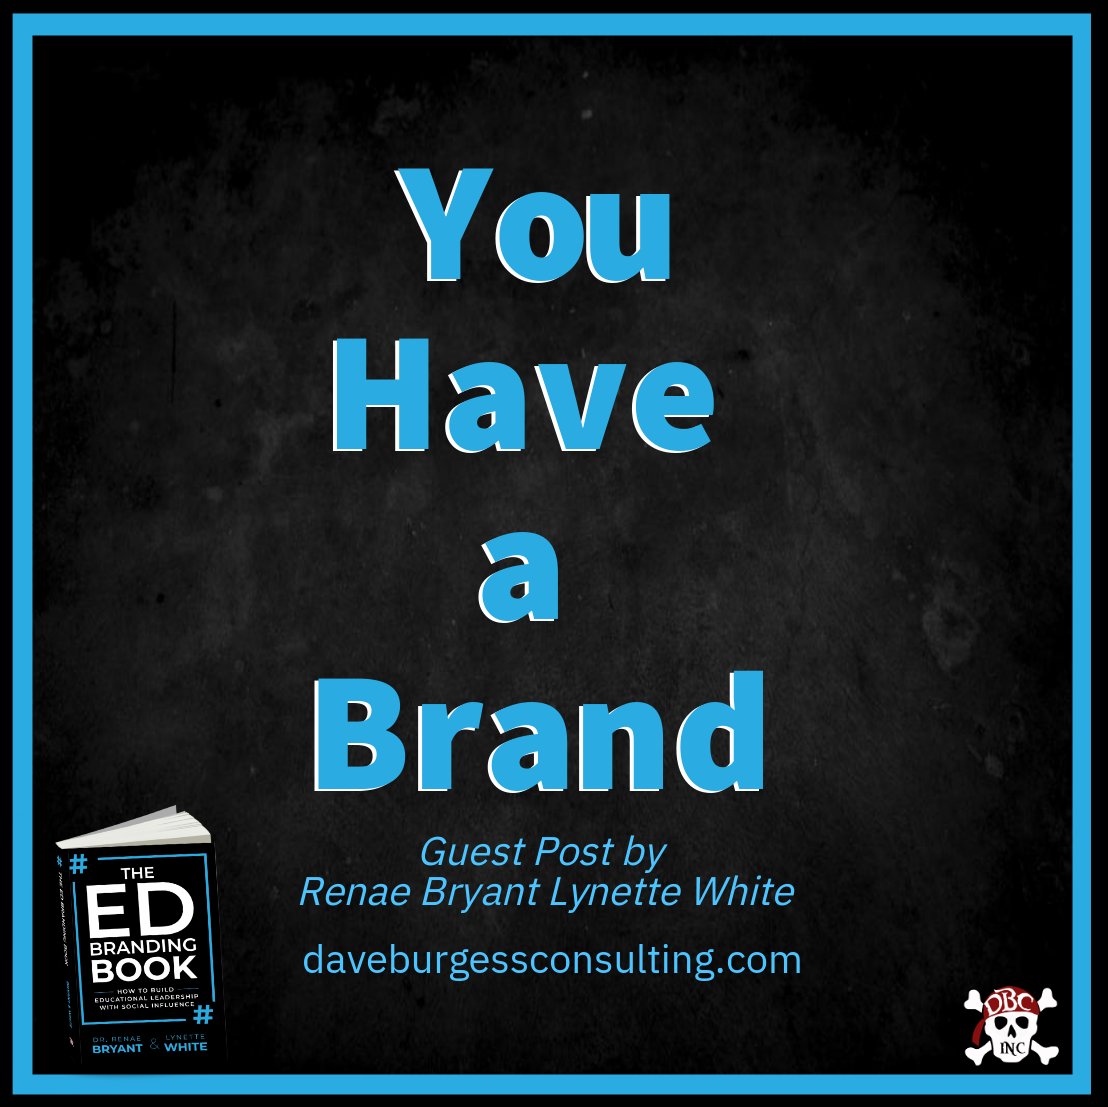 Check out our Guest Blog by Dr. Renae Bryant and Lynette White!
You Have a Brand
➡️ daveburgessconsulting.com/blog/you-have-…
📖 a.co/d/9ubIbWs 
#tlap #dbcincbooks #EdBranding @DrRenaeBryant @lynettewsocial